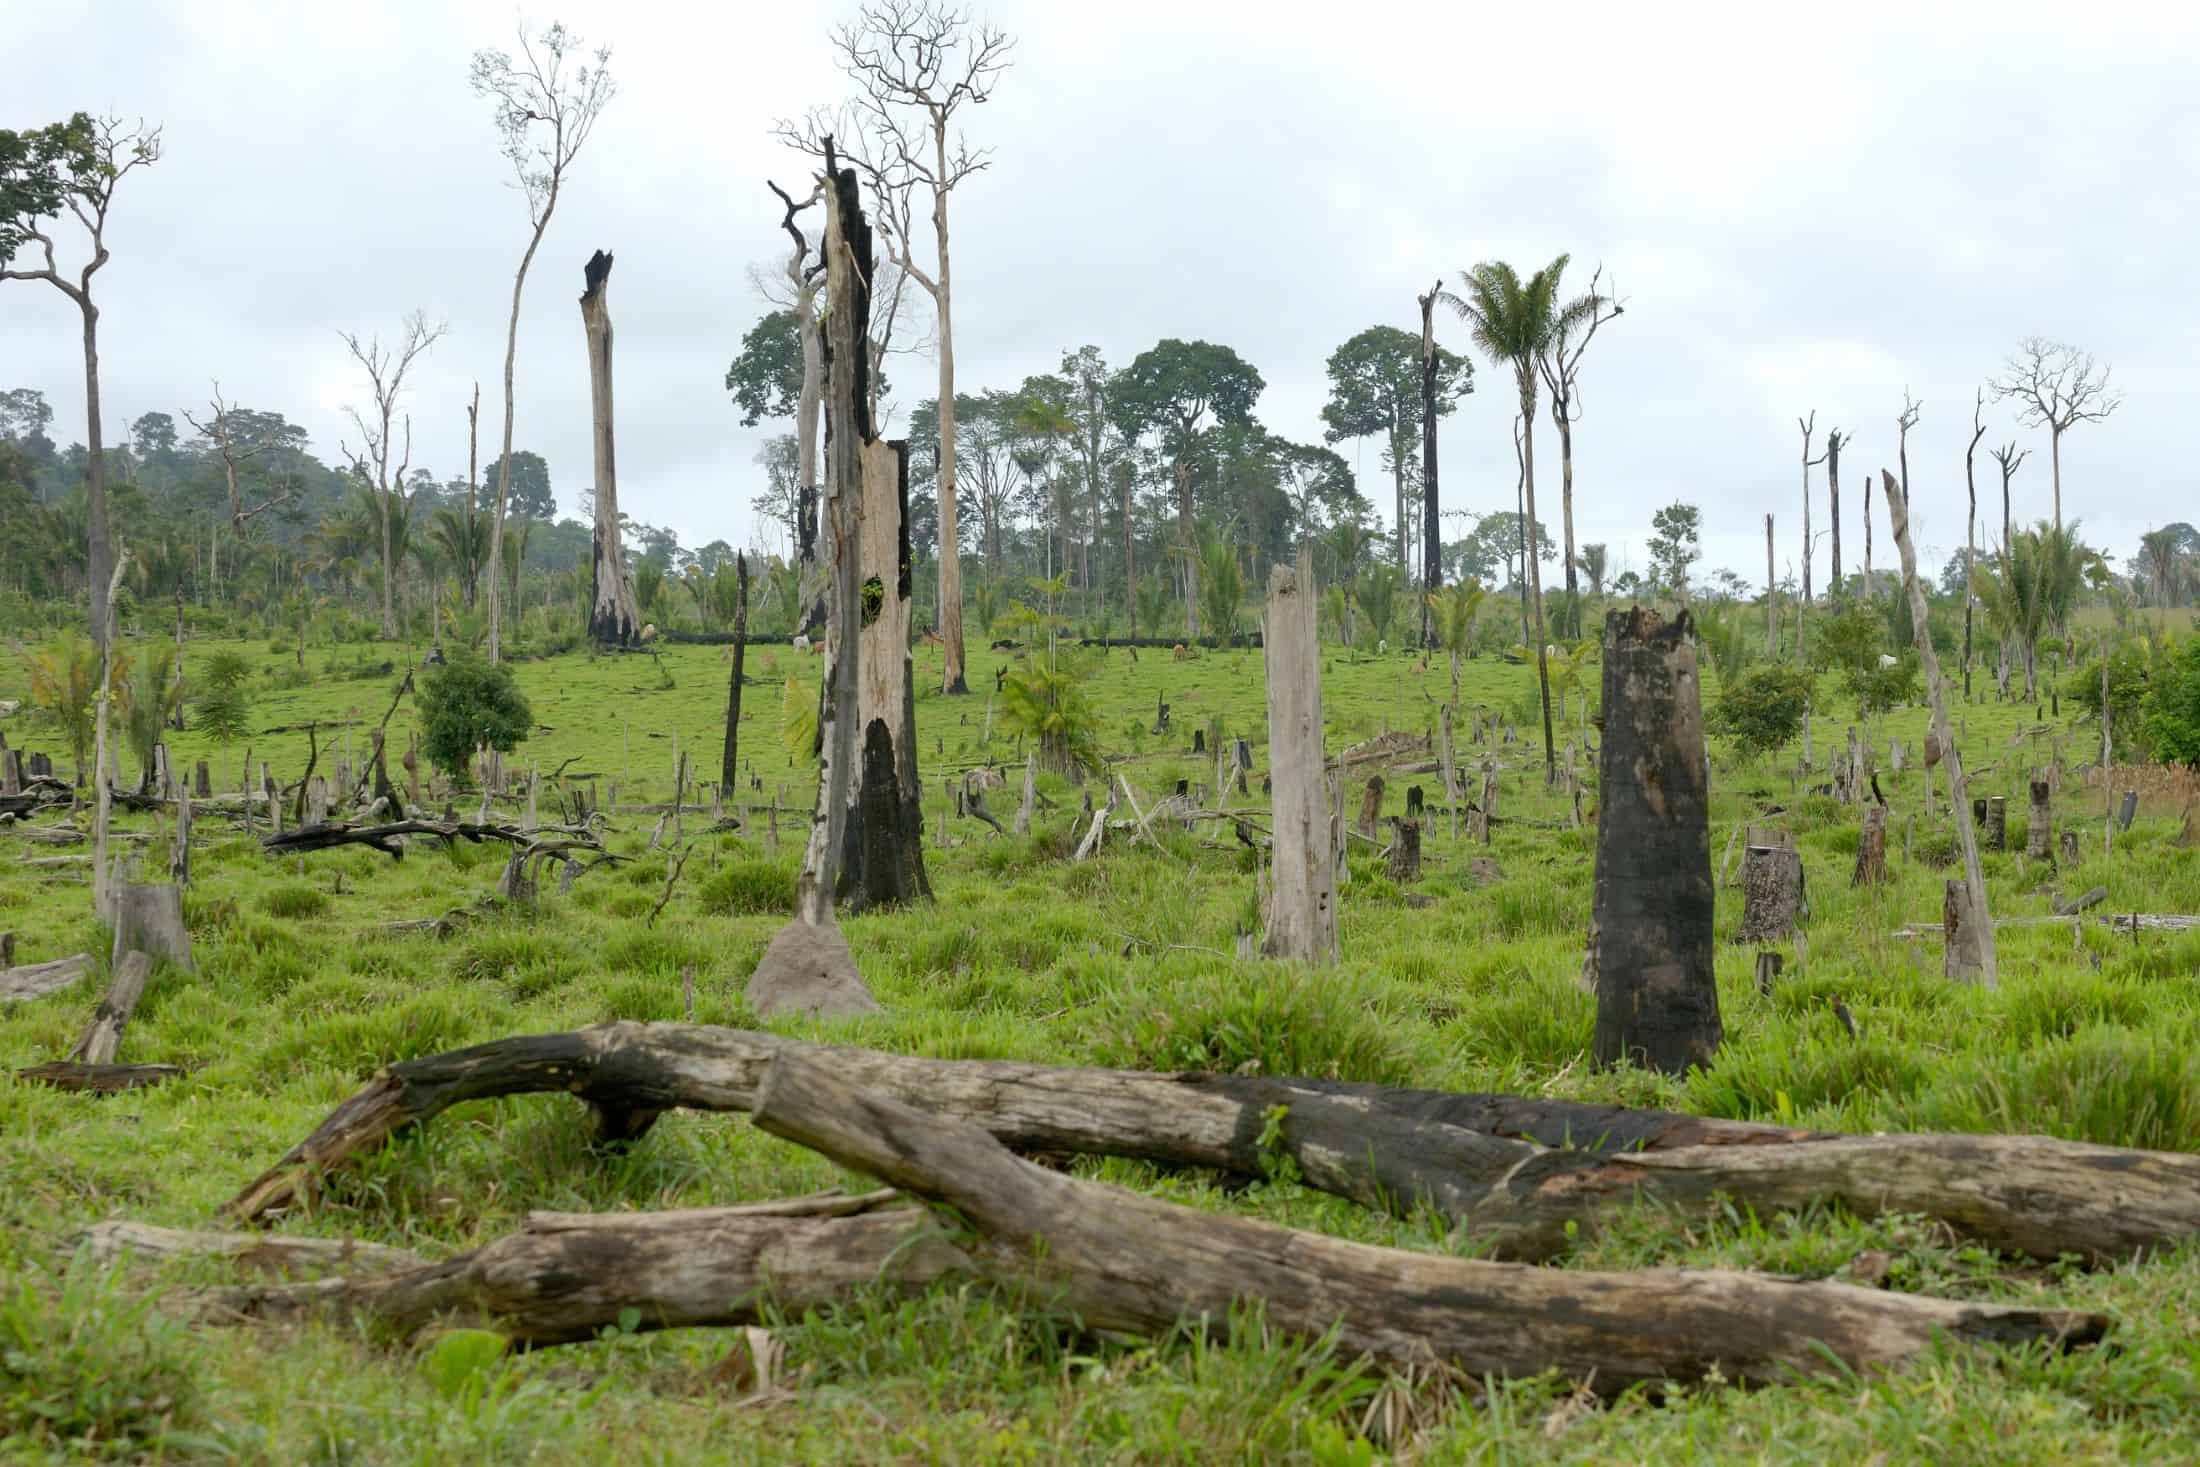 Why grassroots communication is key to stopping Amazon deforestation